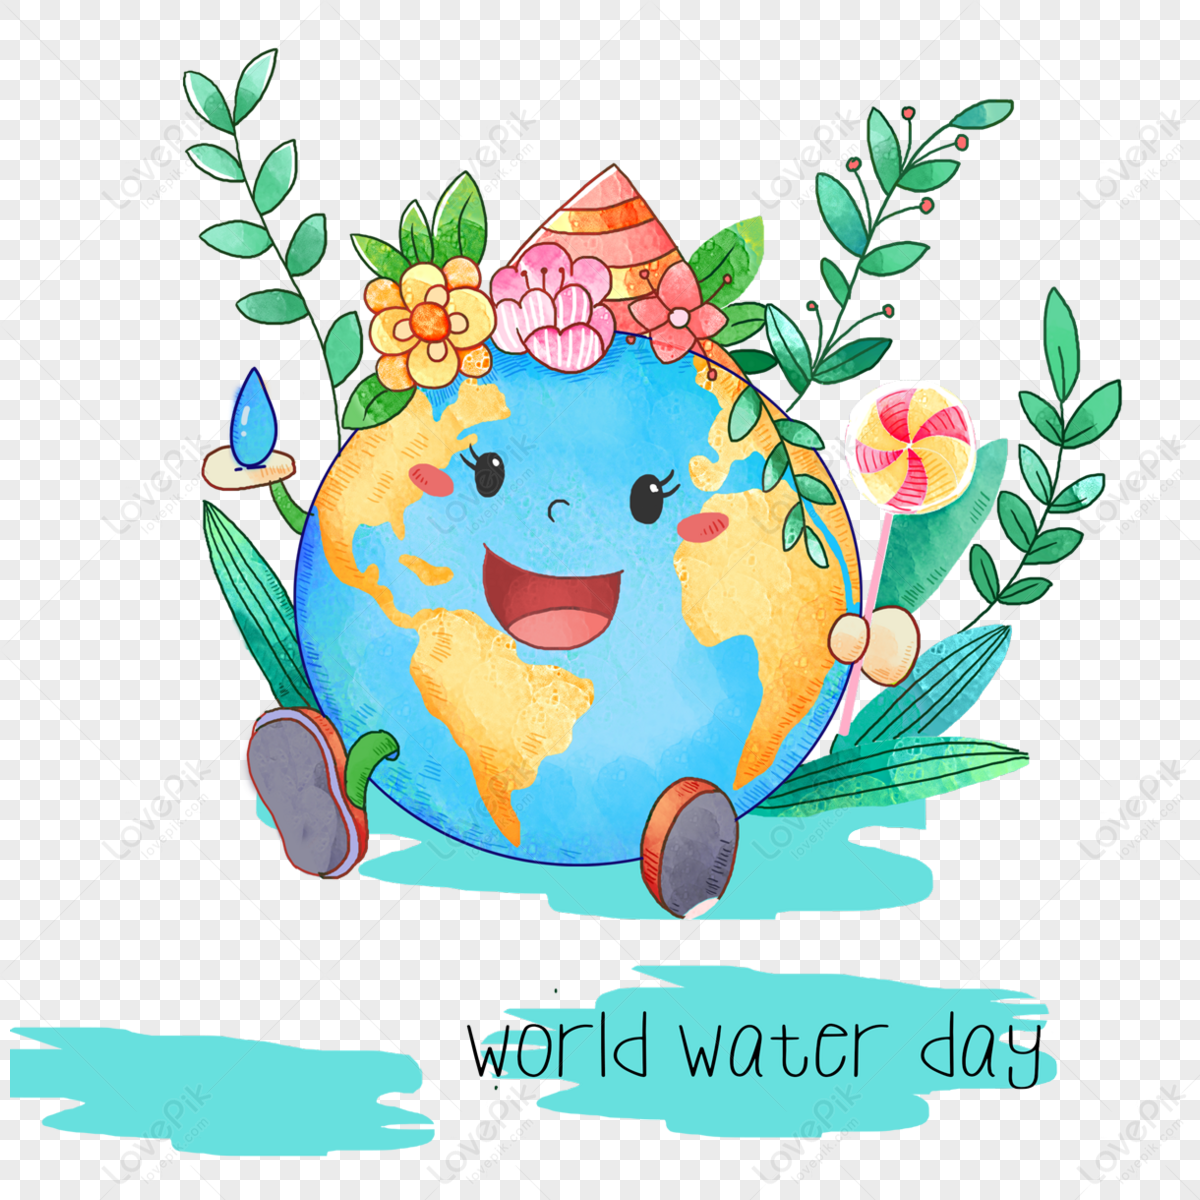 World water day design with happy students - Stock Illustration [74248400]  - PIXTA